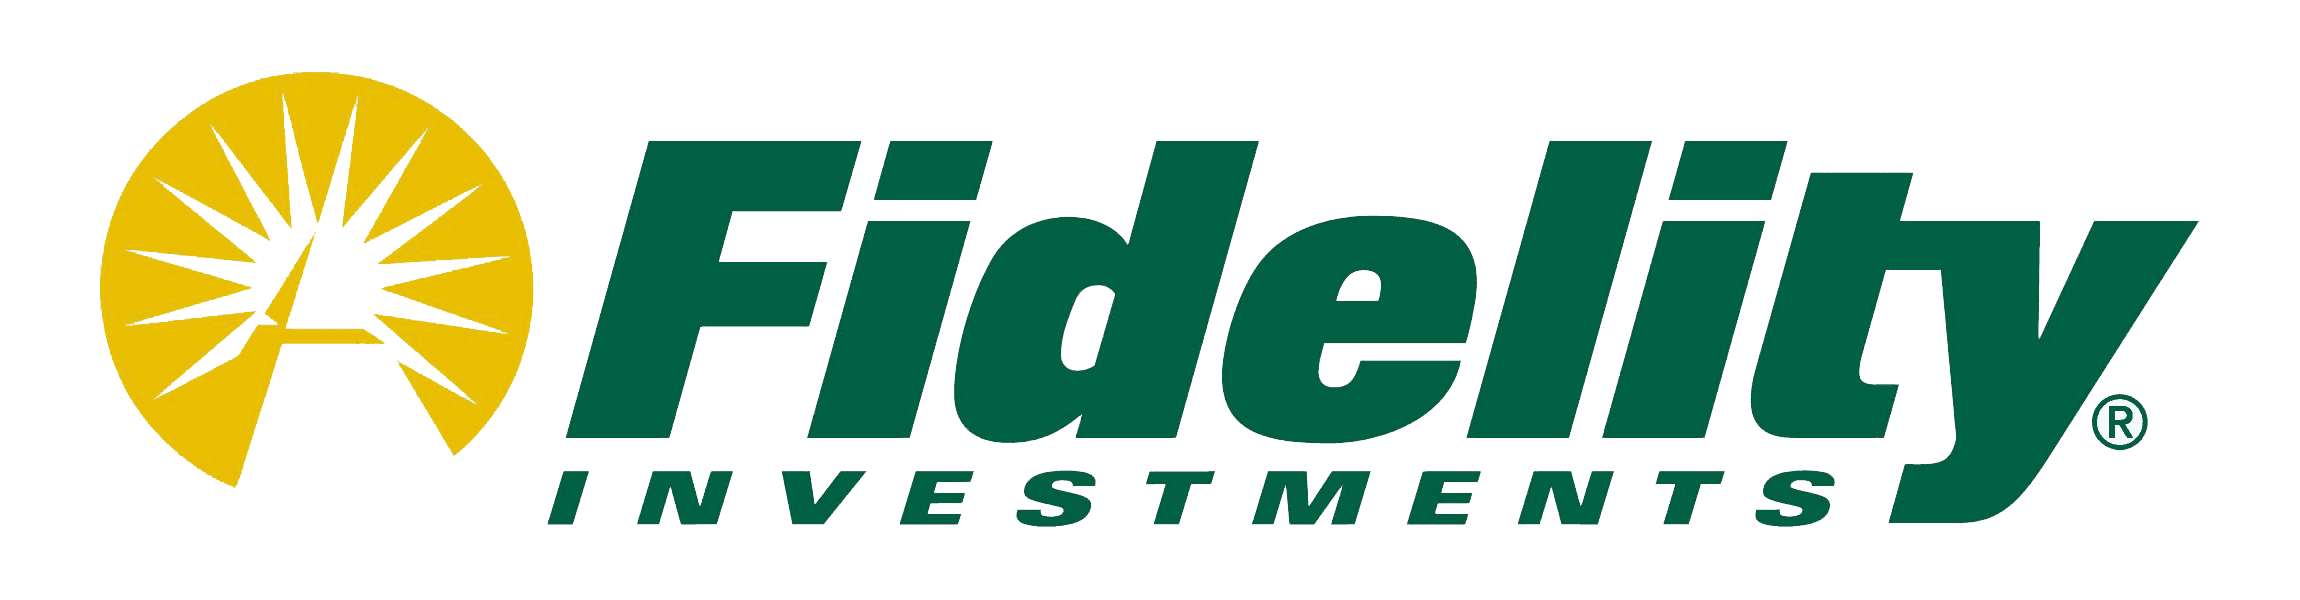 Fidelity Investments trader app logo in green preceded by a bright star 